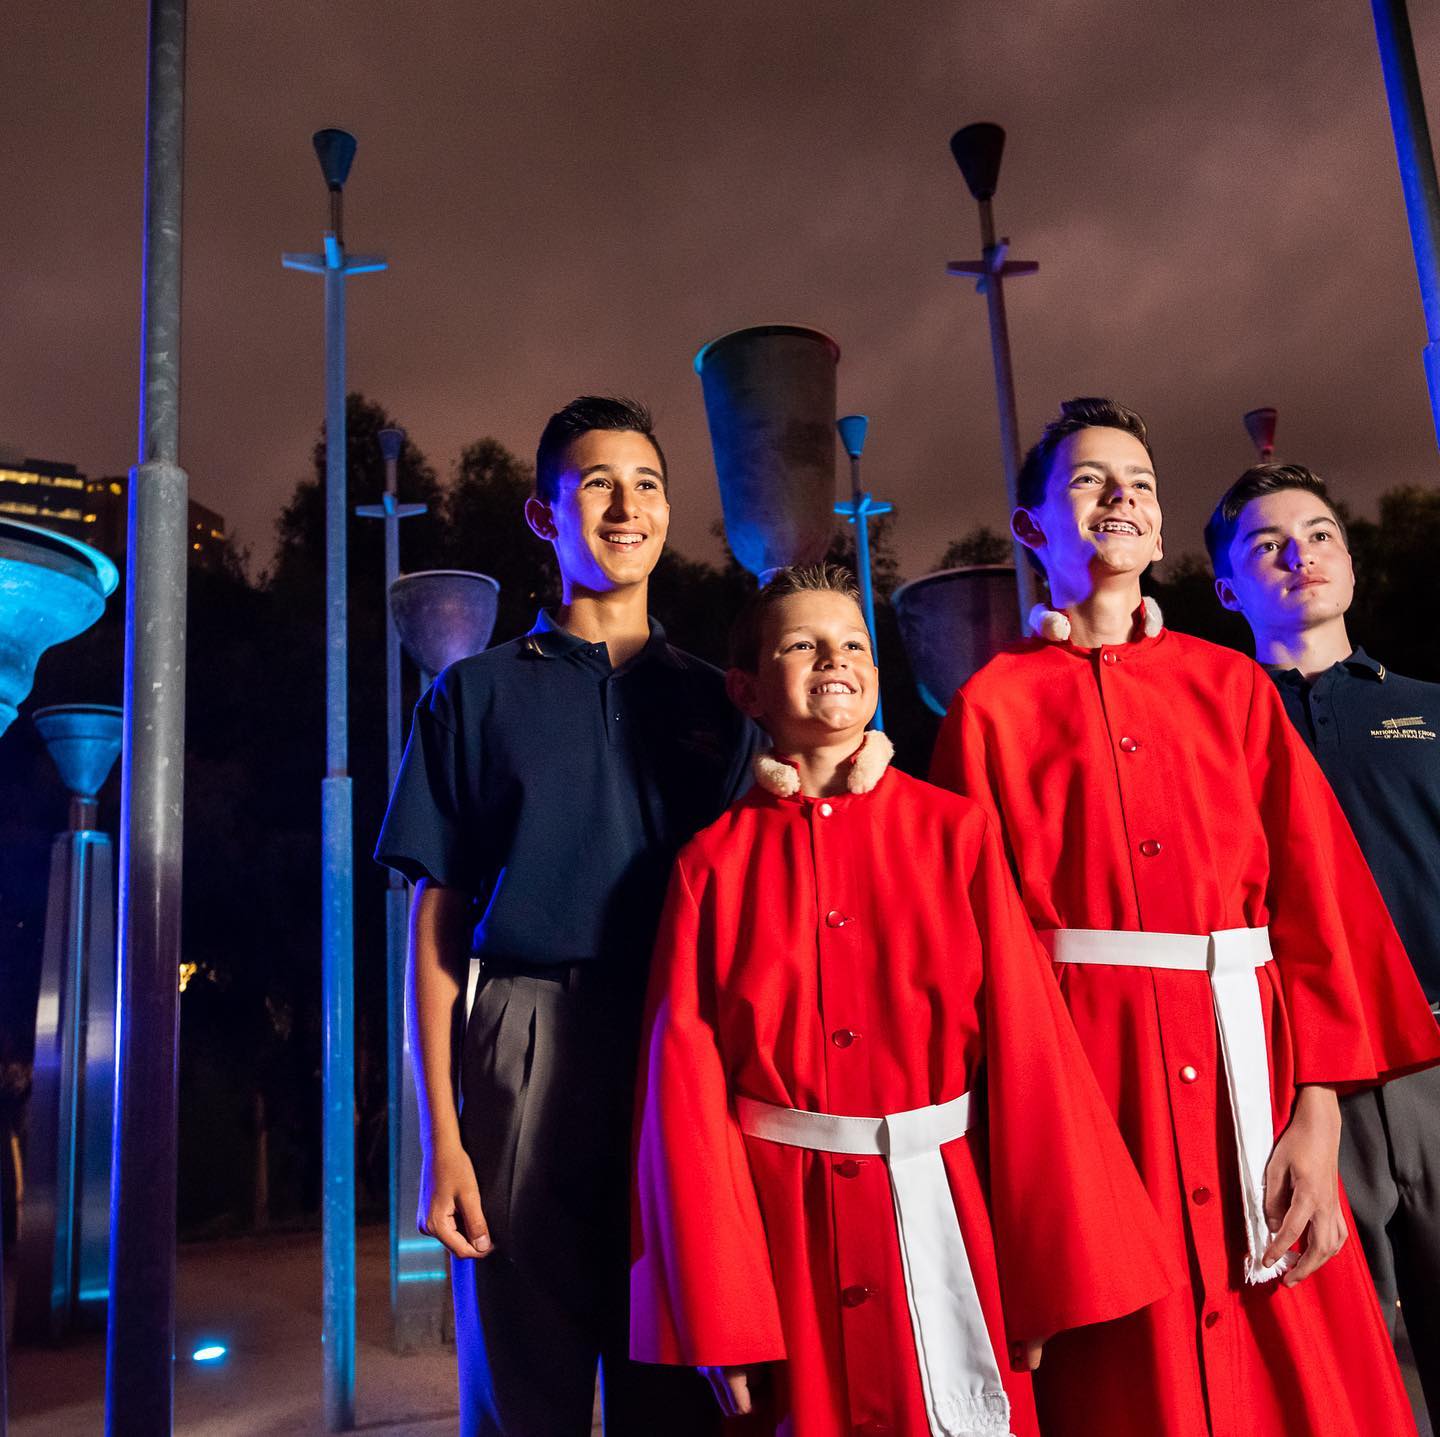 Four National Boys Choir members; two are wearing navy polo shirts and grey pants, and two are wearing red robes